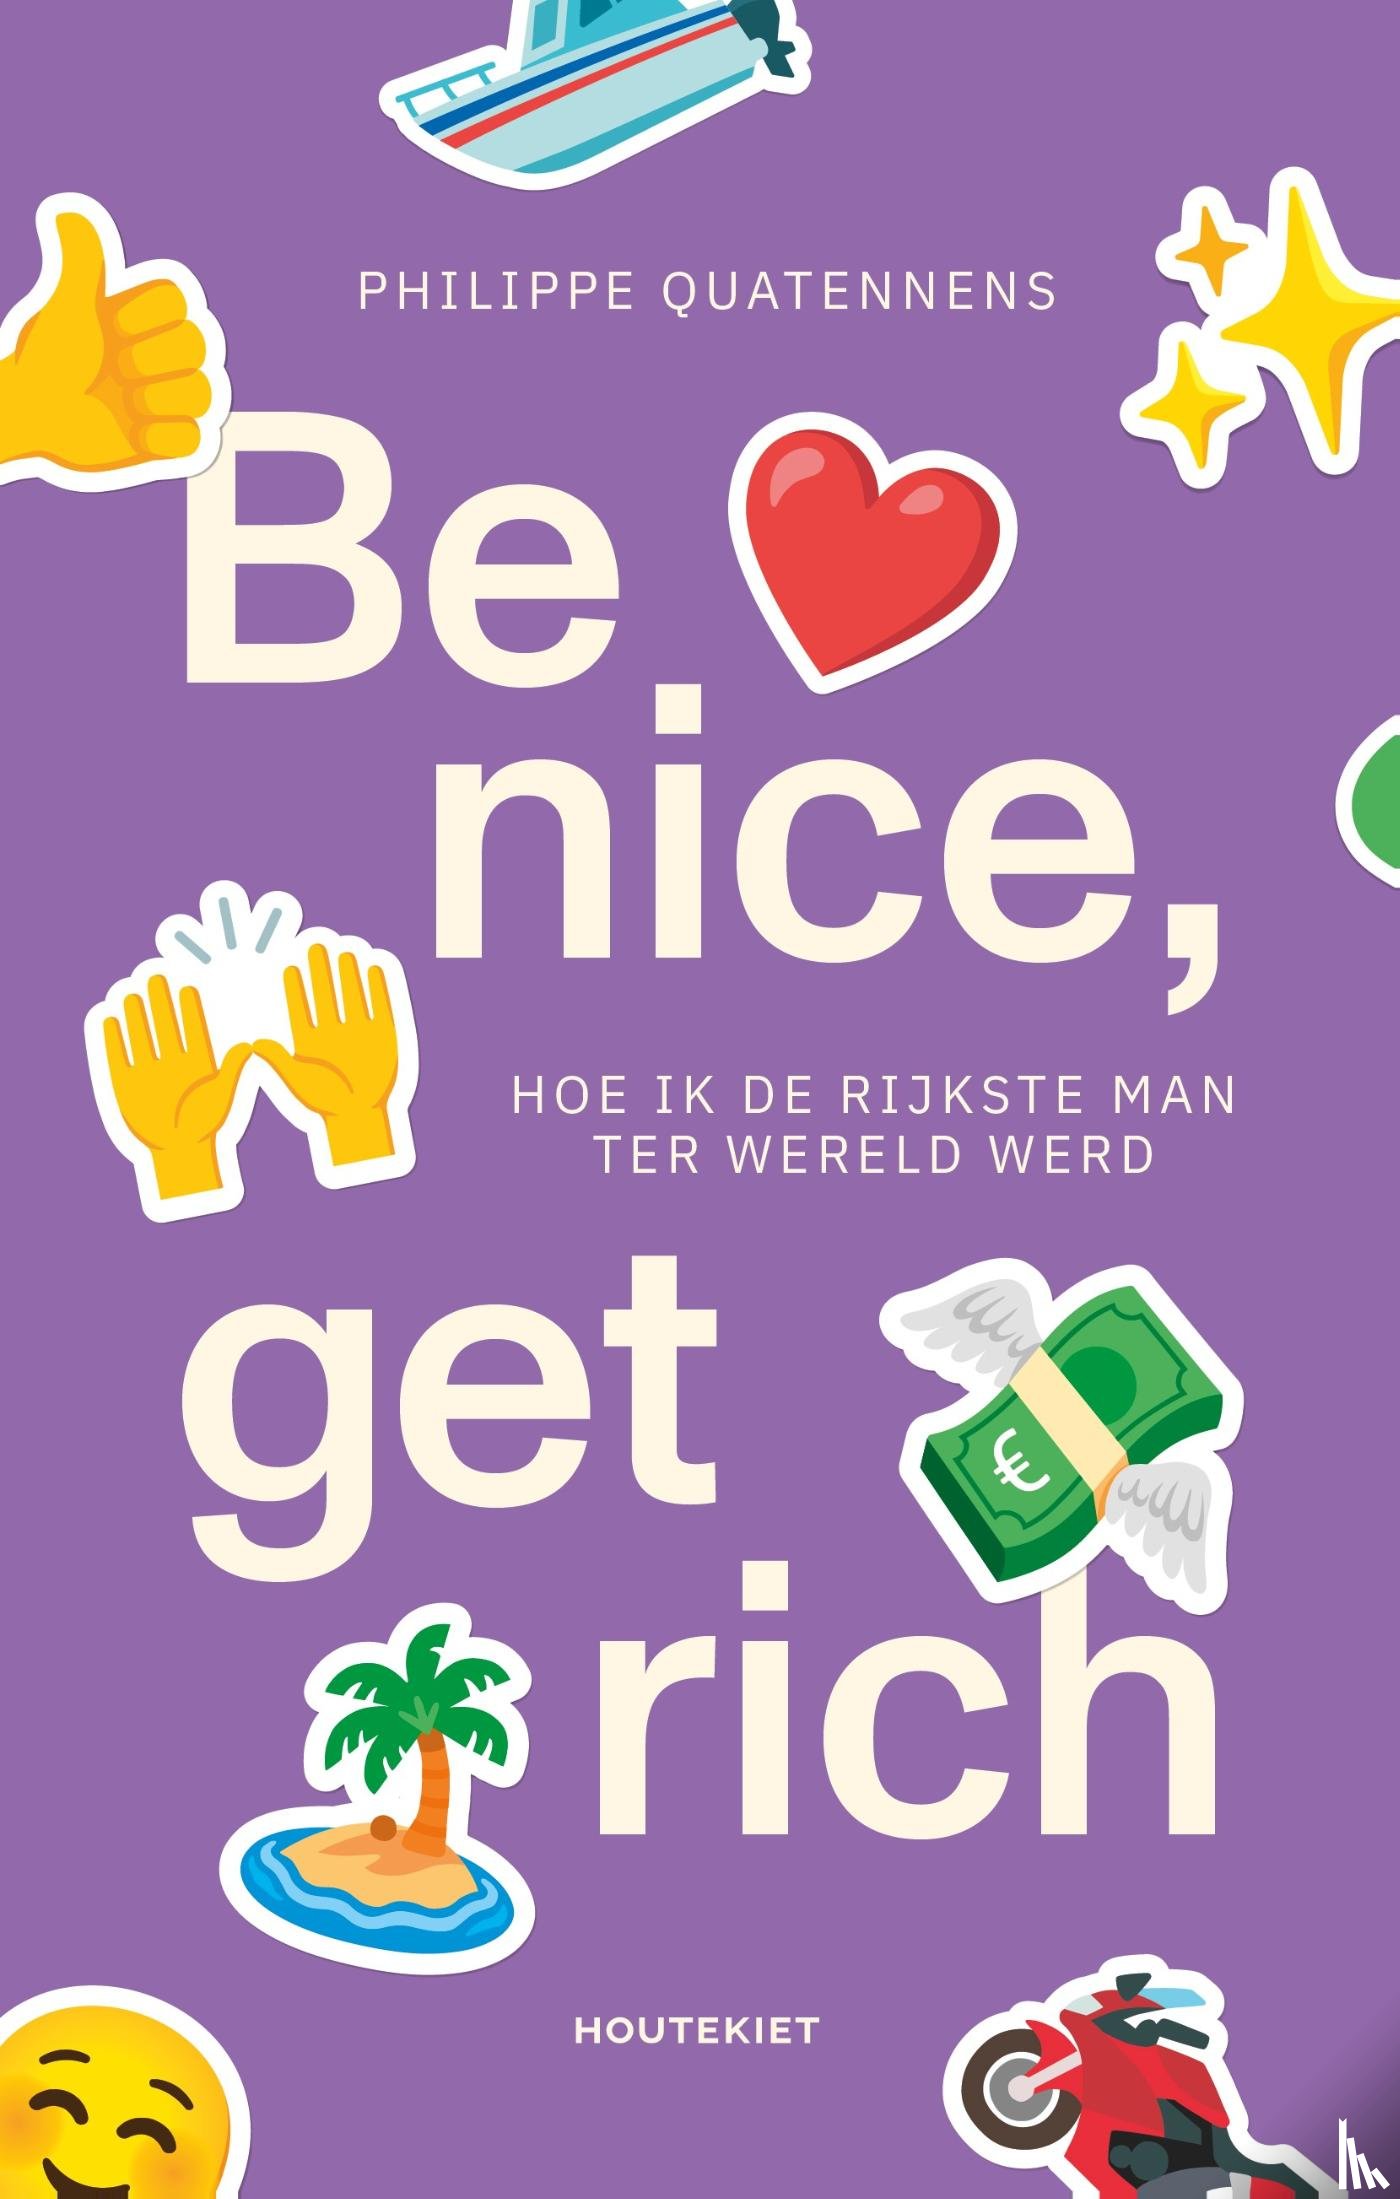 Quatennens, Philippe - Be nice, get rich